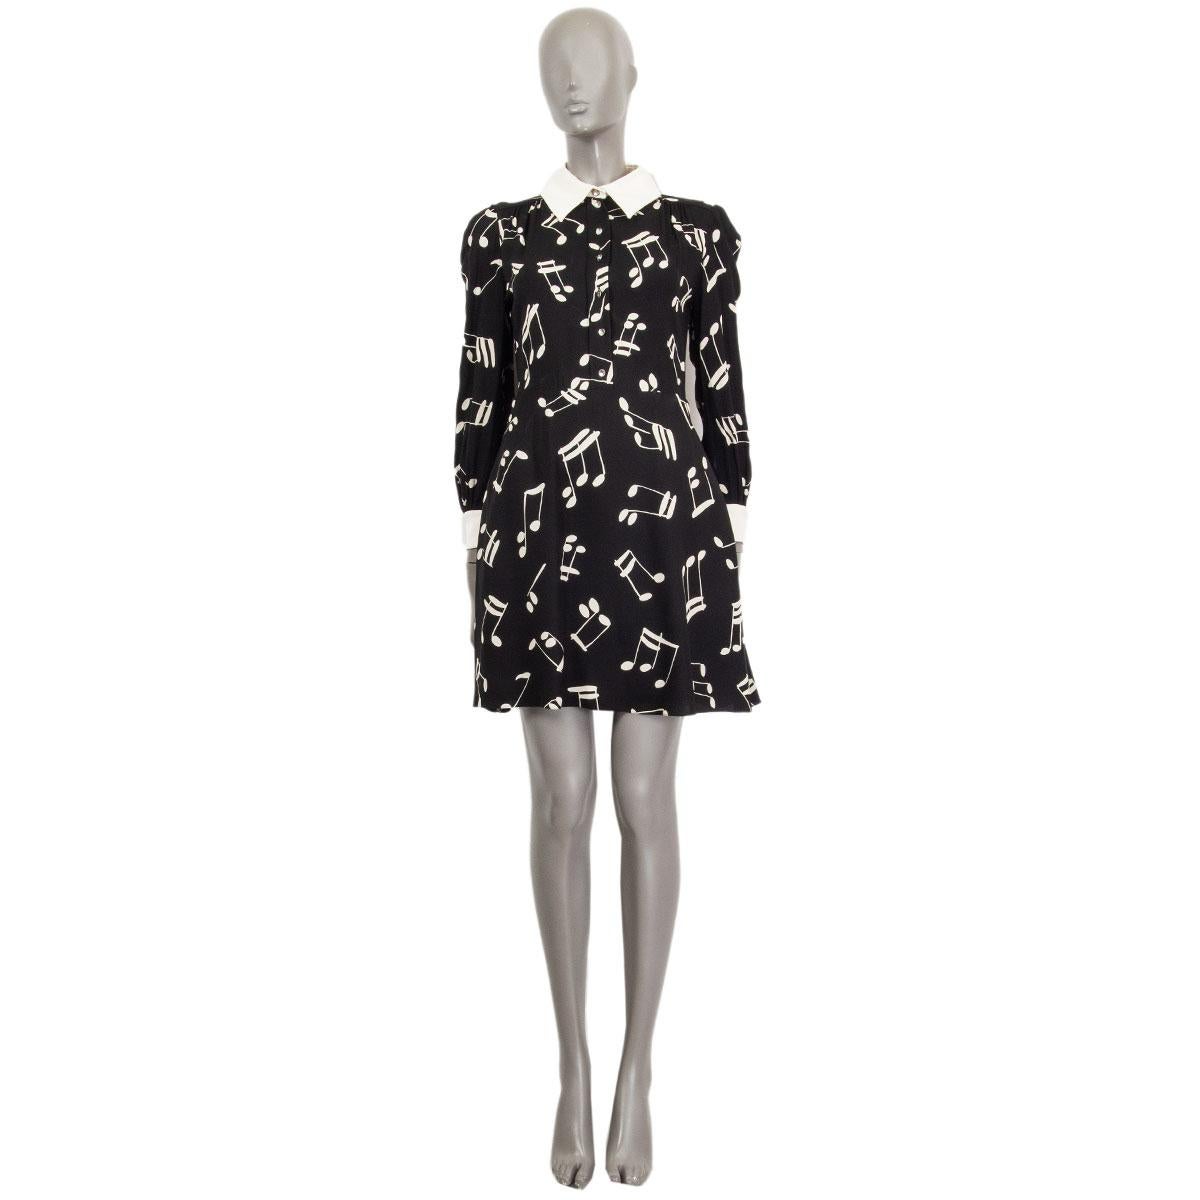 100% authentic Saint Laurent music note printed shirt dress in black, off-white and cream viscose (100%) and silk (100%). Features crystal buttons on front and cuffs. Has two slit pockets on the side and opens with a side zipper. Has been worn and